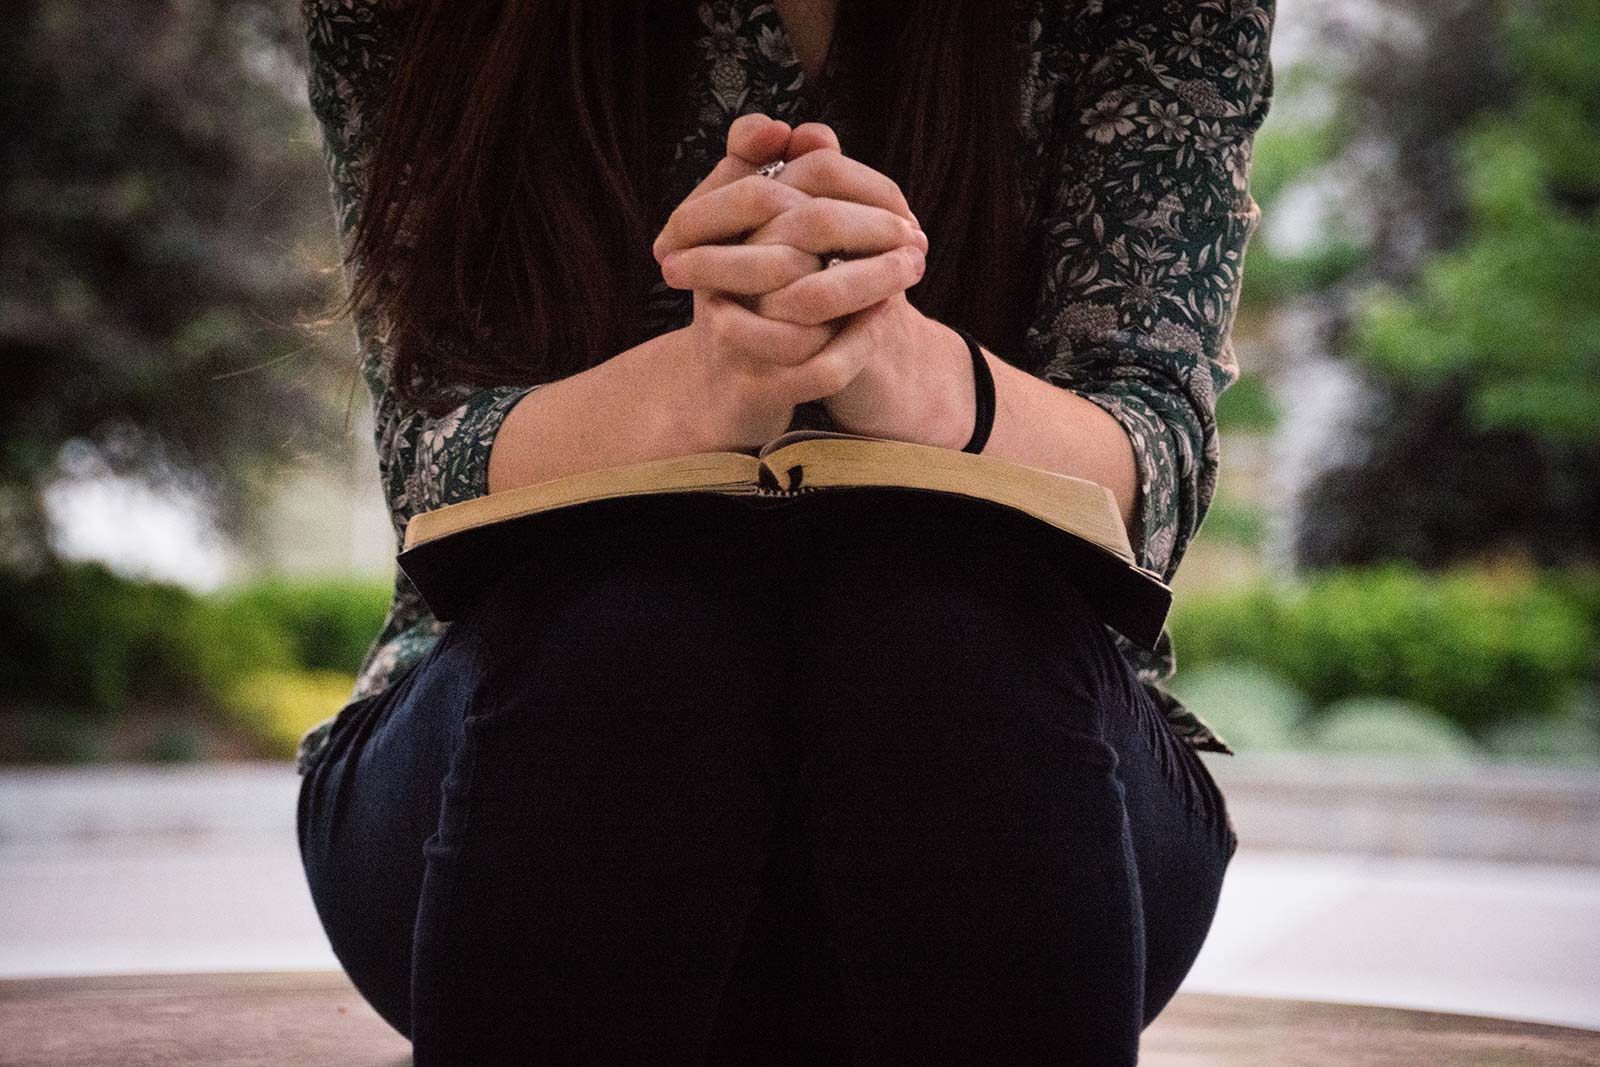 Does prayer change God’s mind? If not, what’s the point?